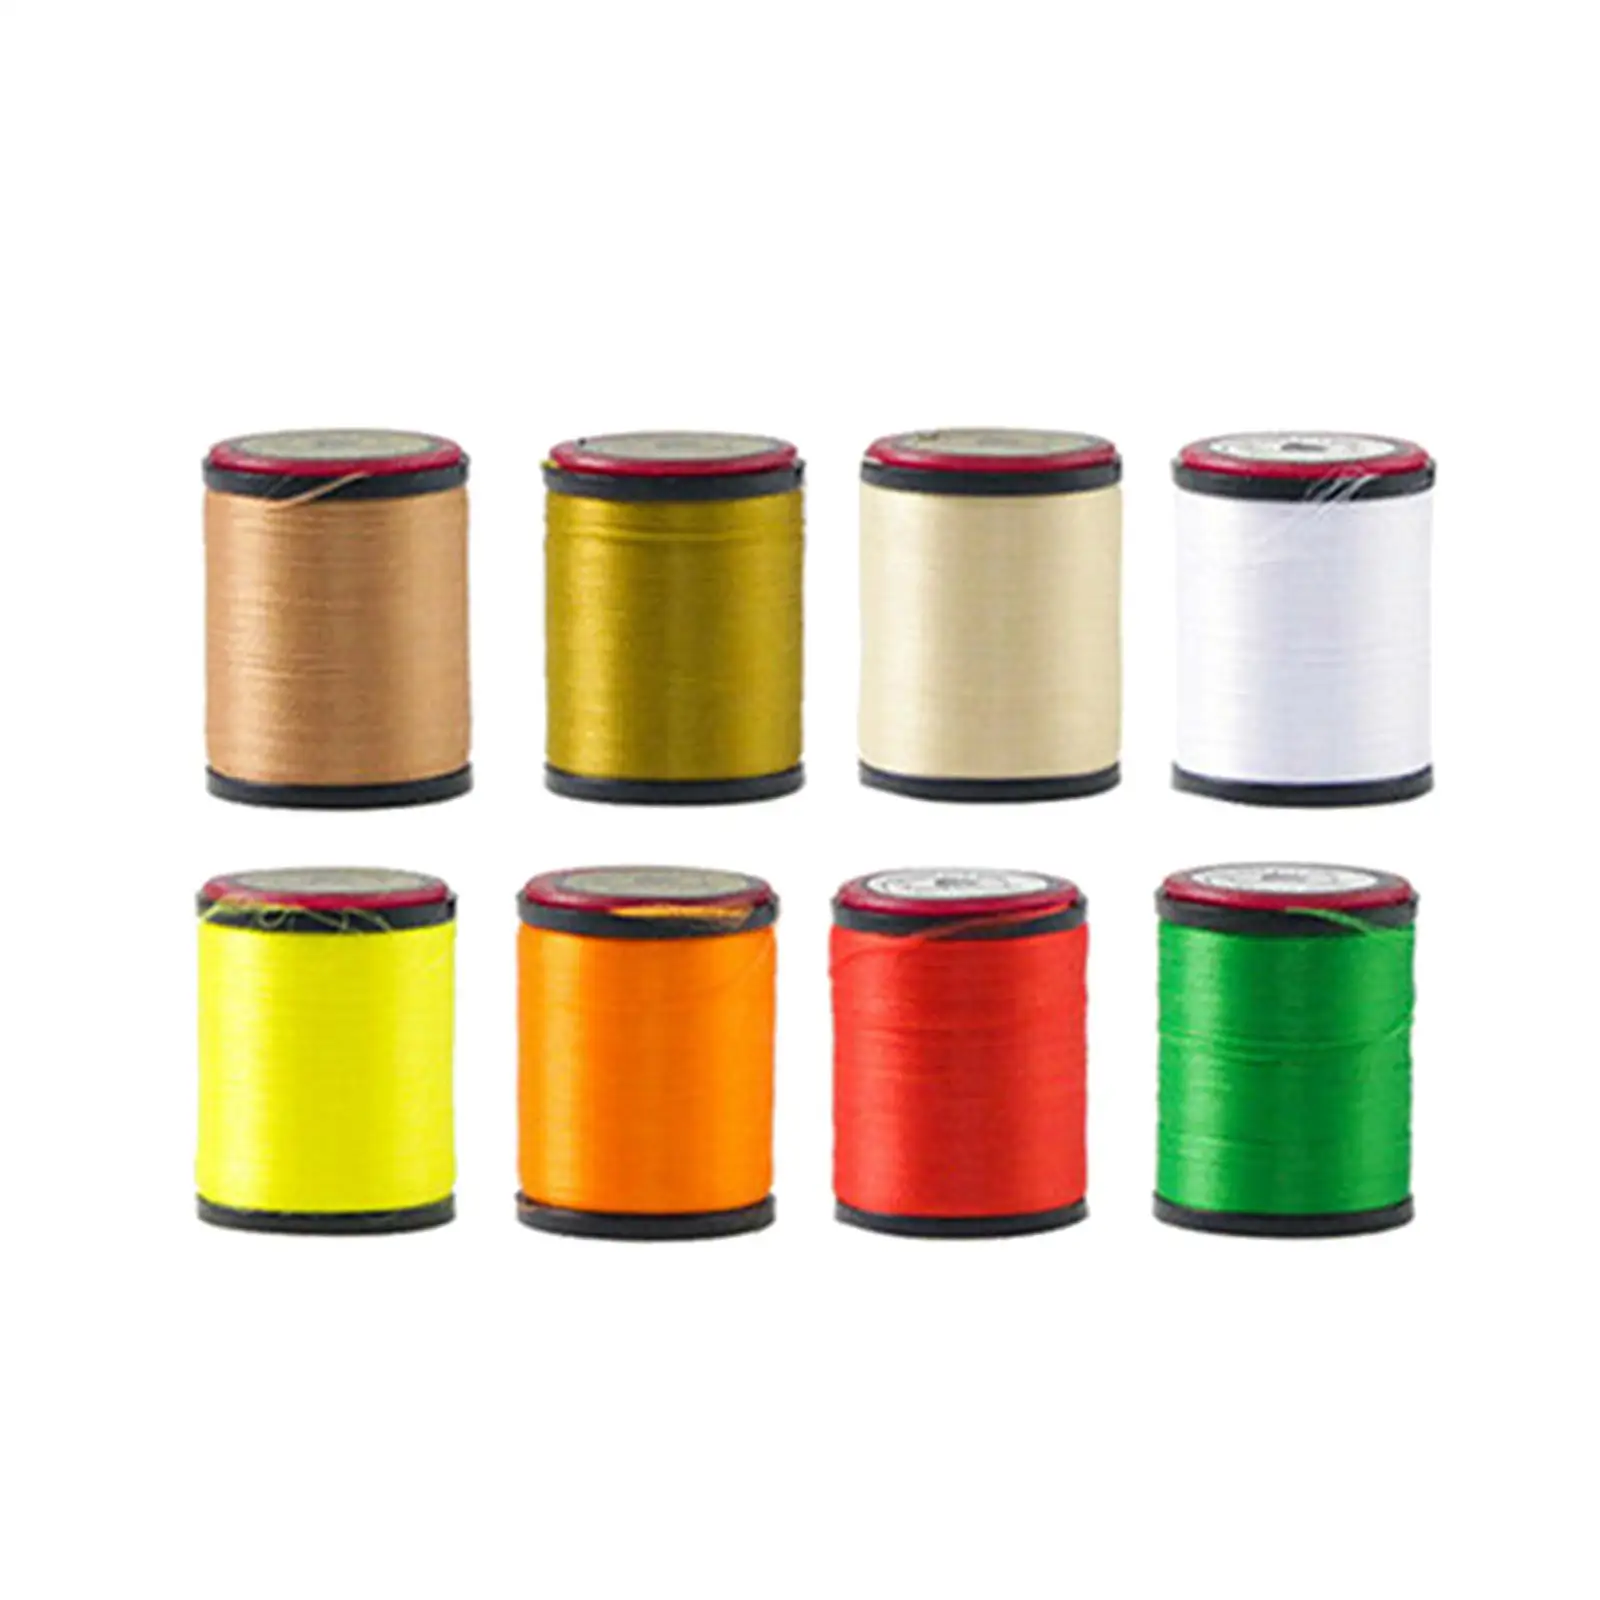 8Pcs Lightly Waxed Fly Tying Thread Kit High Strength Fly Fishing Materials